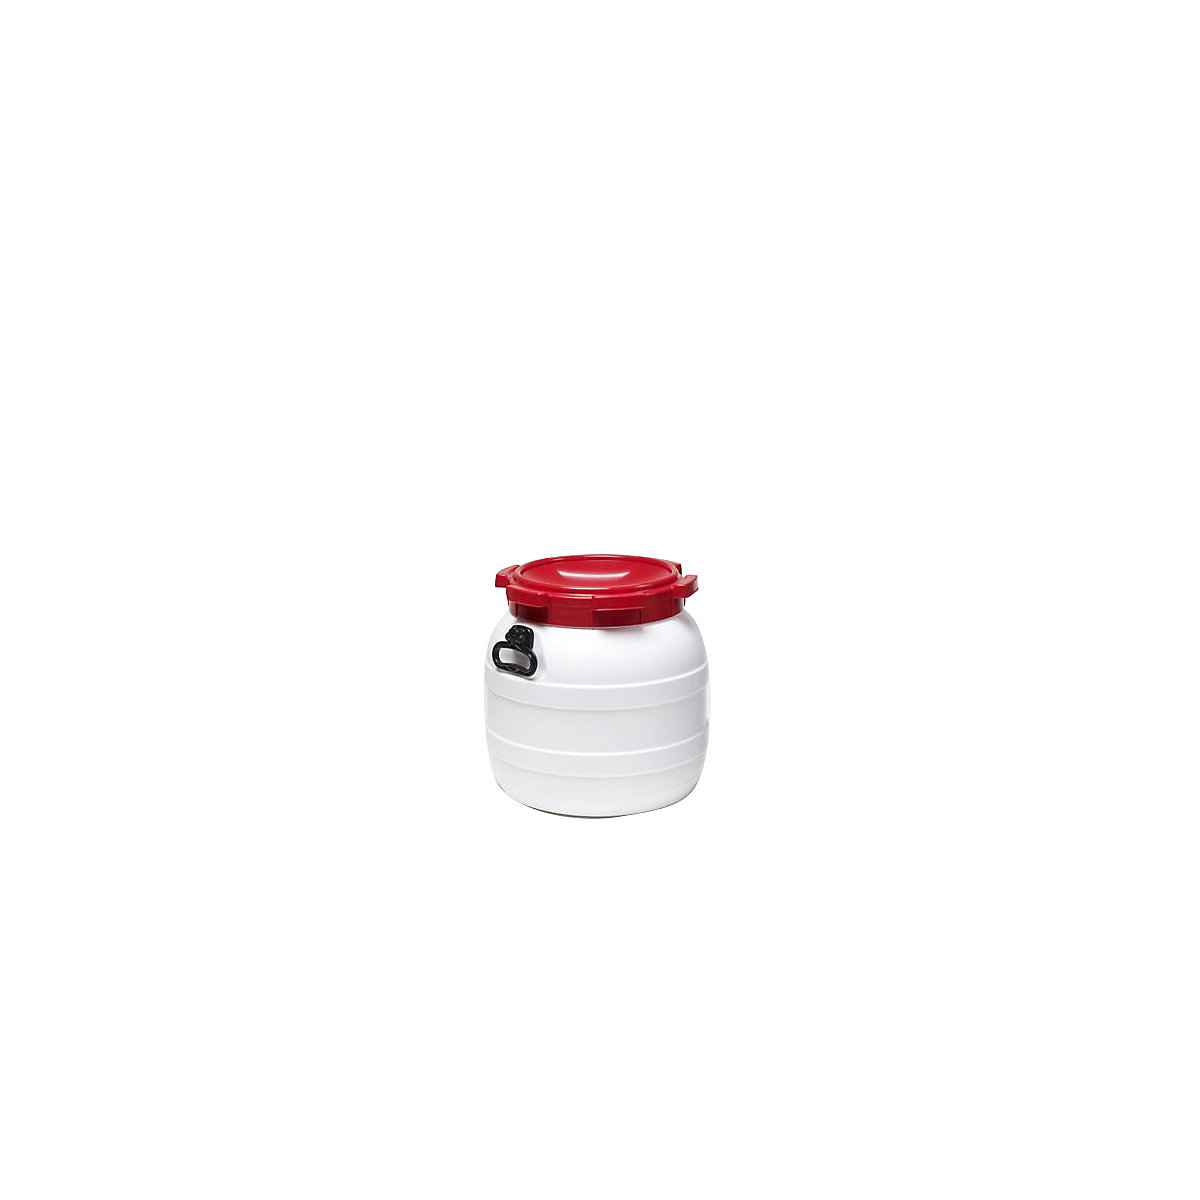 Wide neck drum with screw on lid, white / red, capacity 42 l, height 418 mm